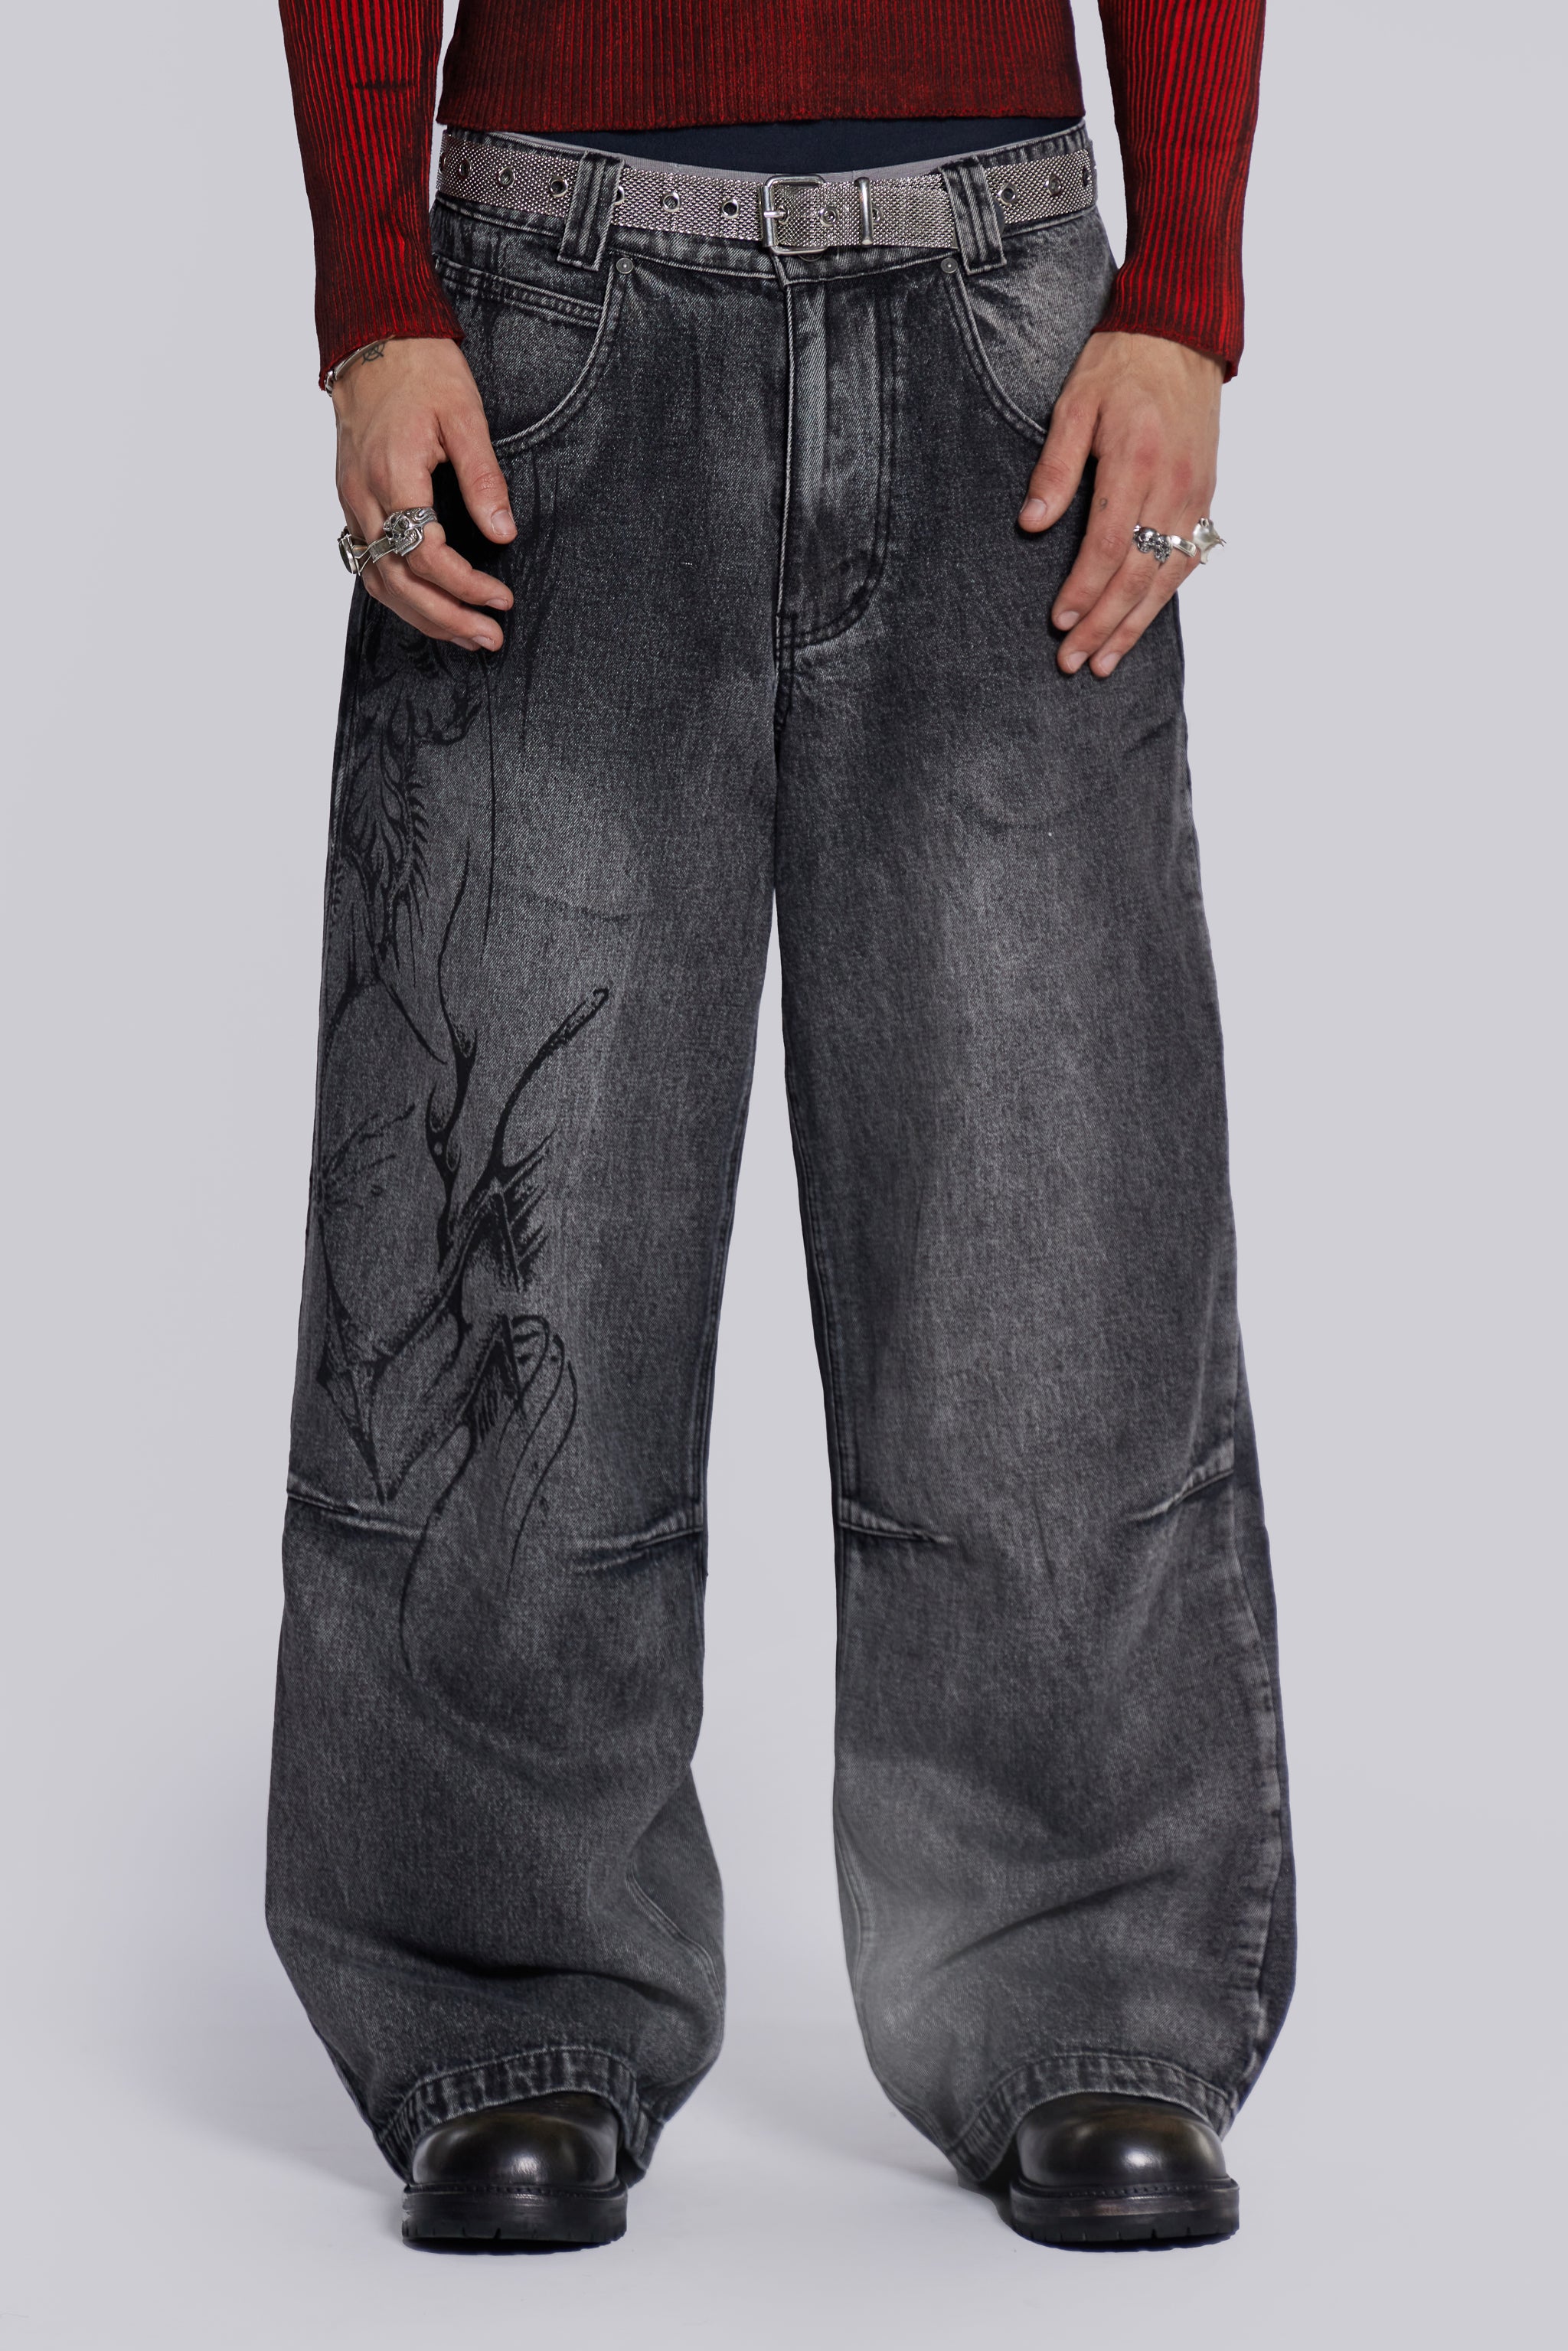 Jaded London Black Decal Colossus Jeans